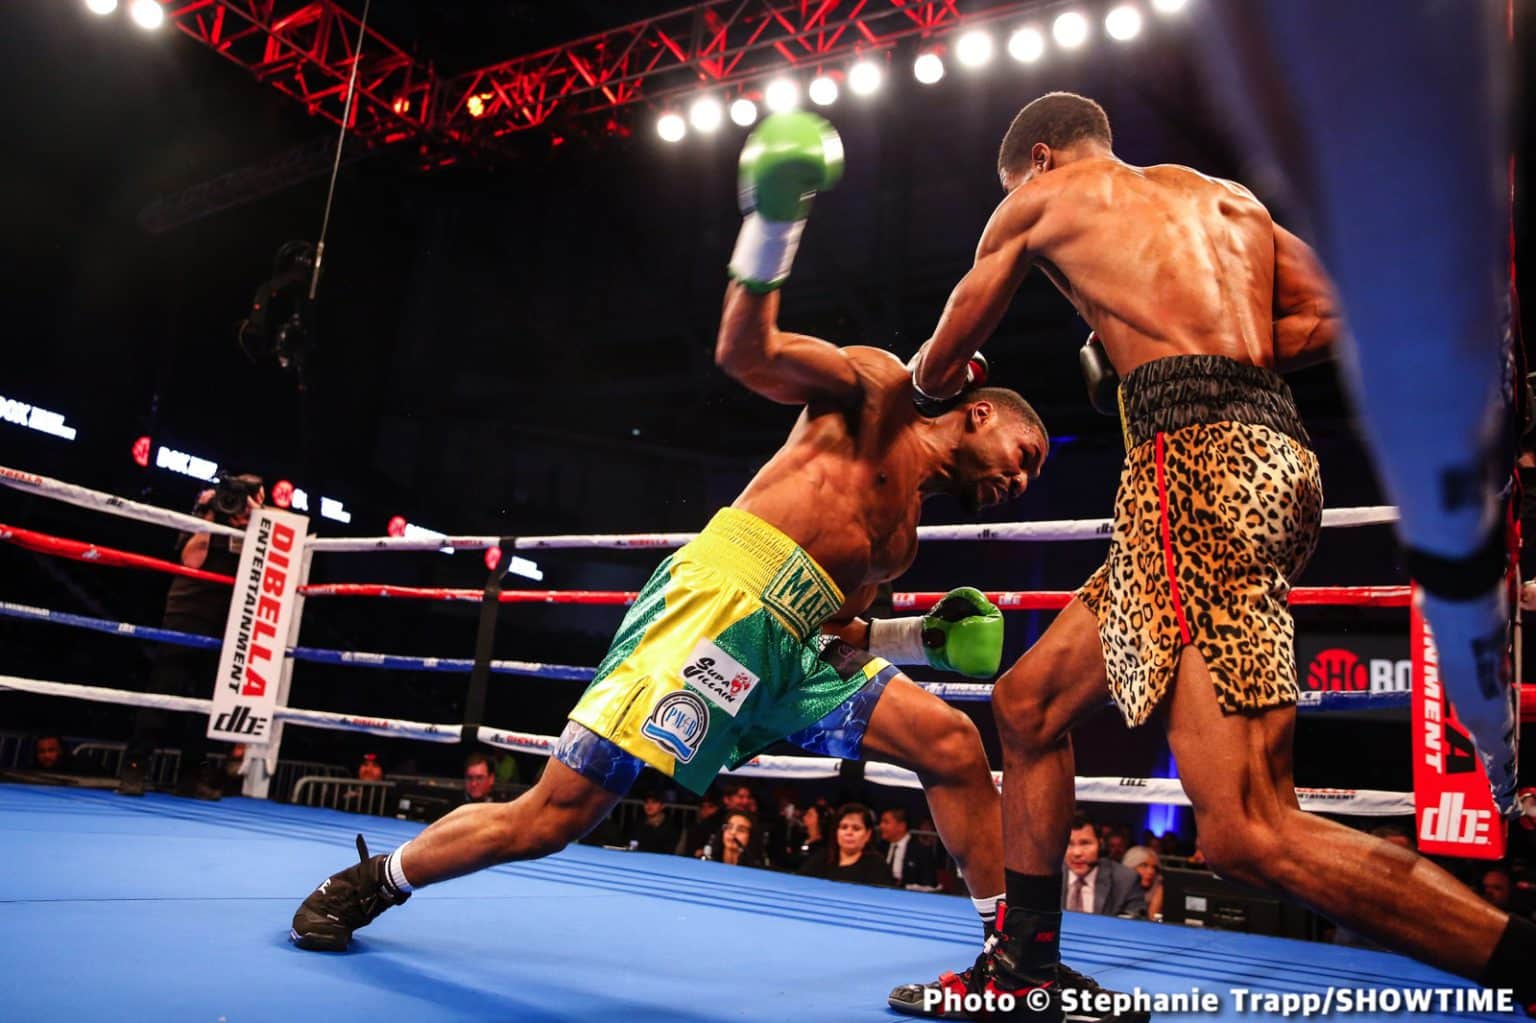 Image: Results / Photos: Holmes outpoints Villarreal on Showtime